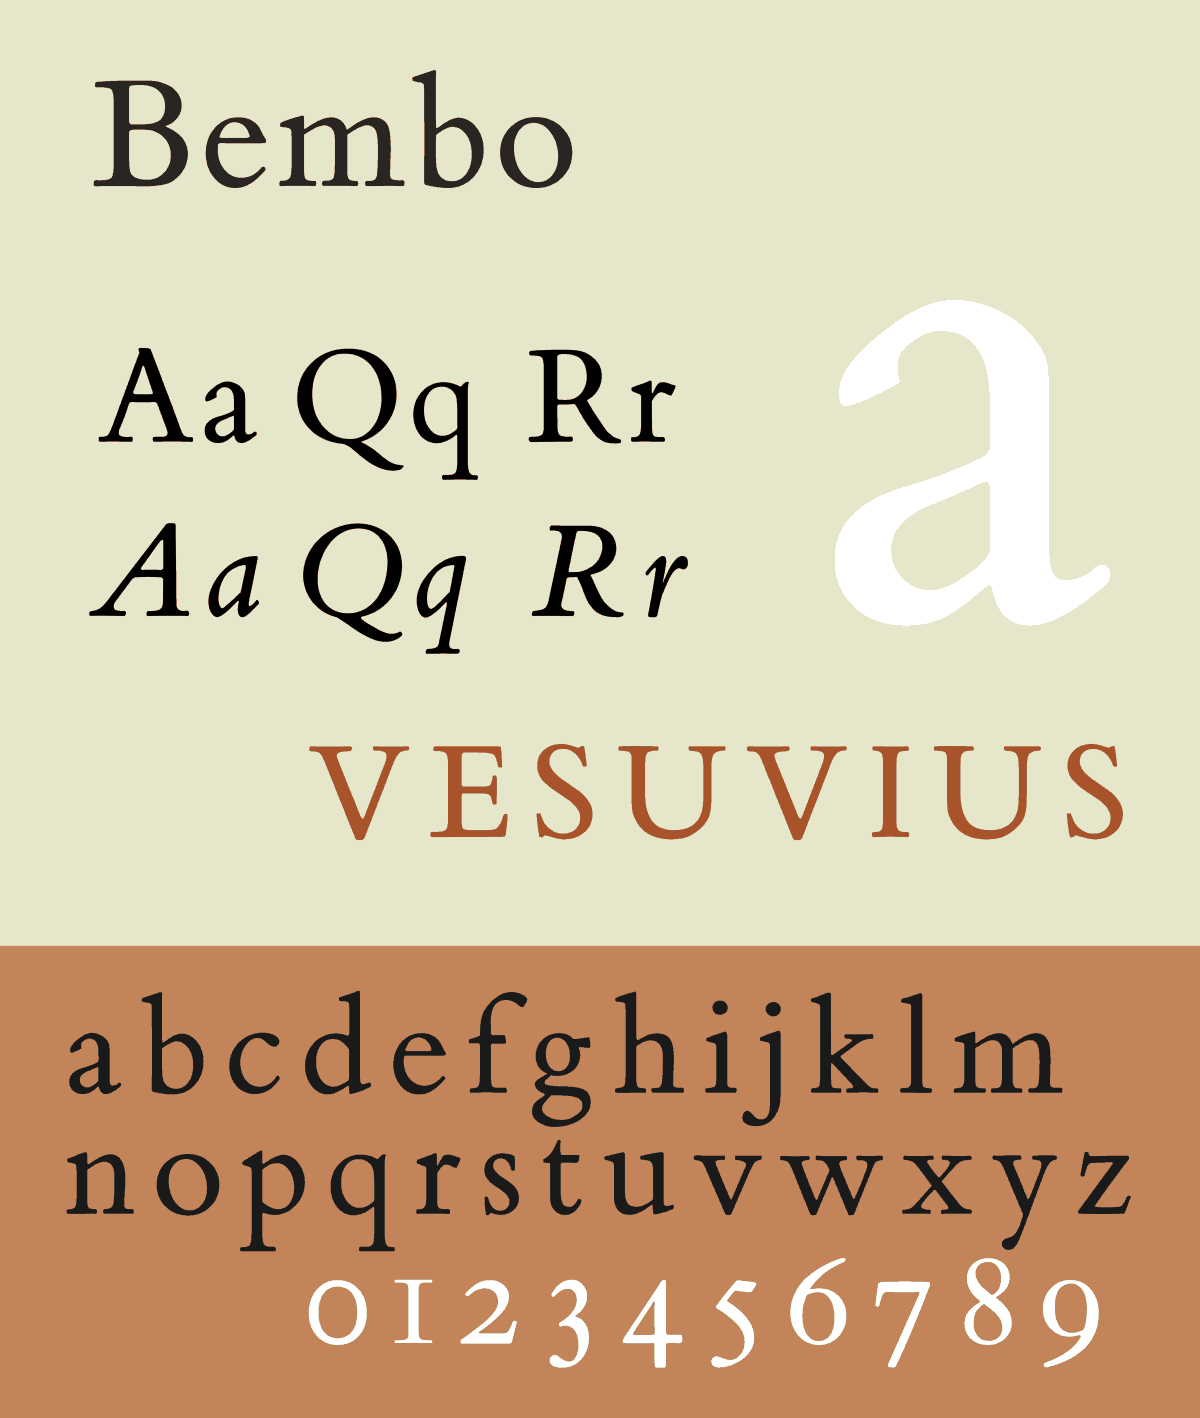 bembo typeface free download